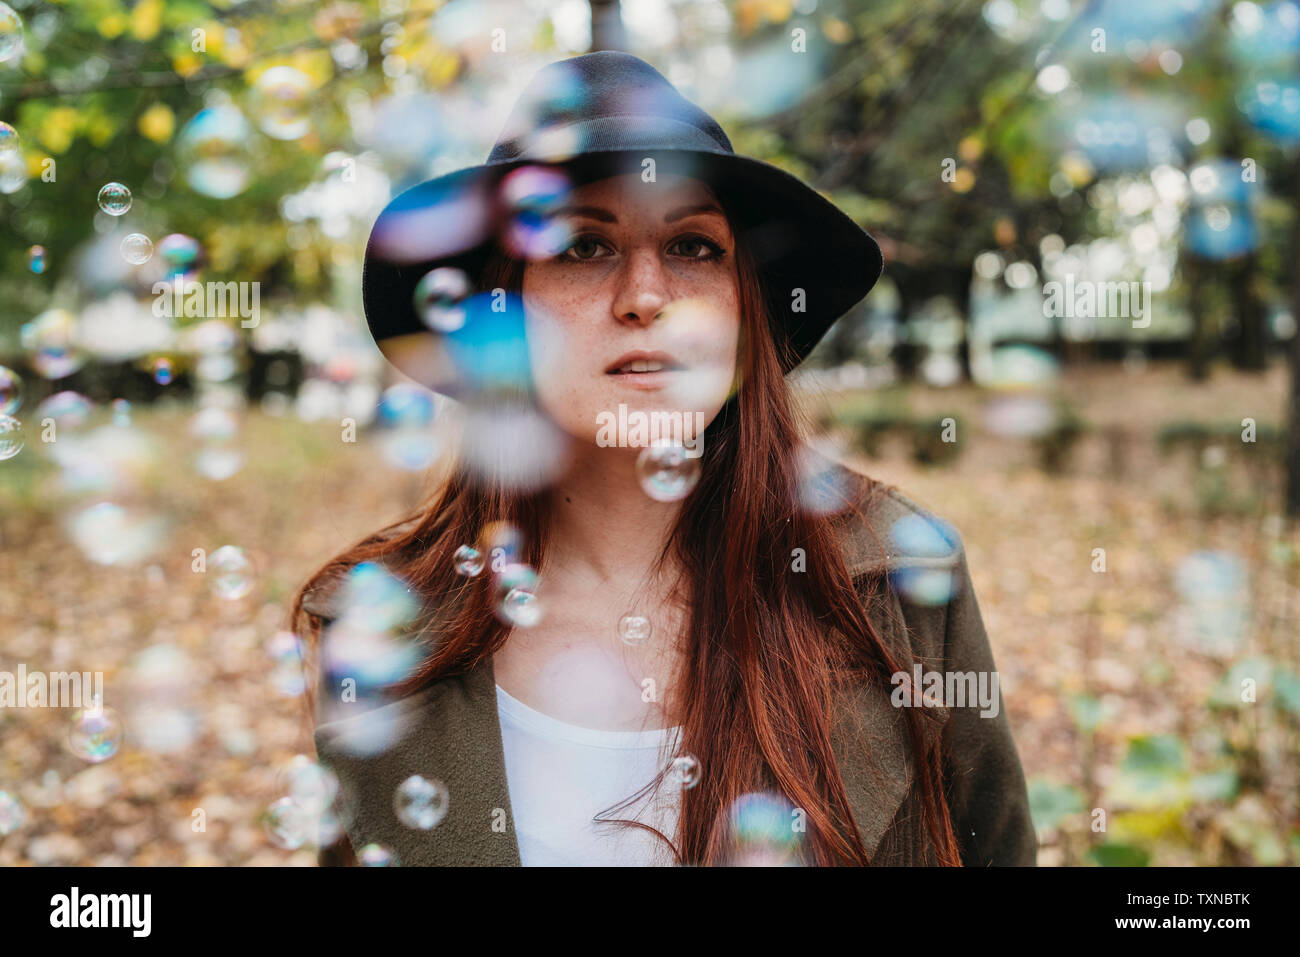 Young woman with long red hair amongst floating bubbles in autumn park, shallow focus portrait Stock Photo